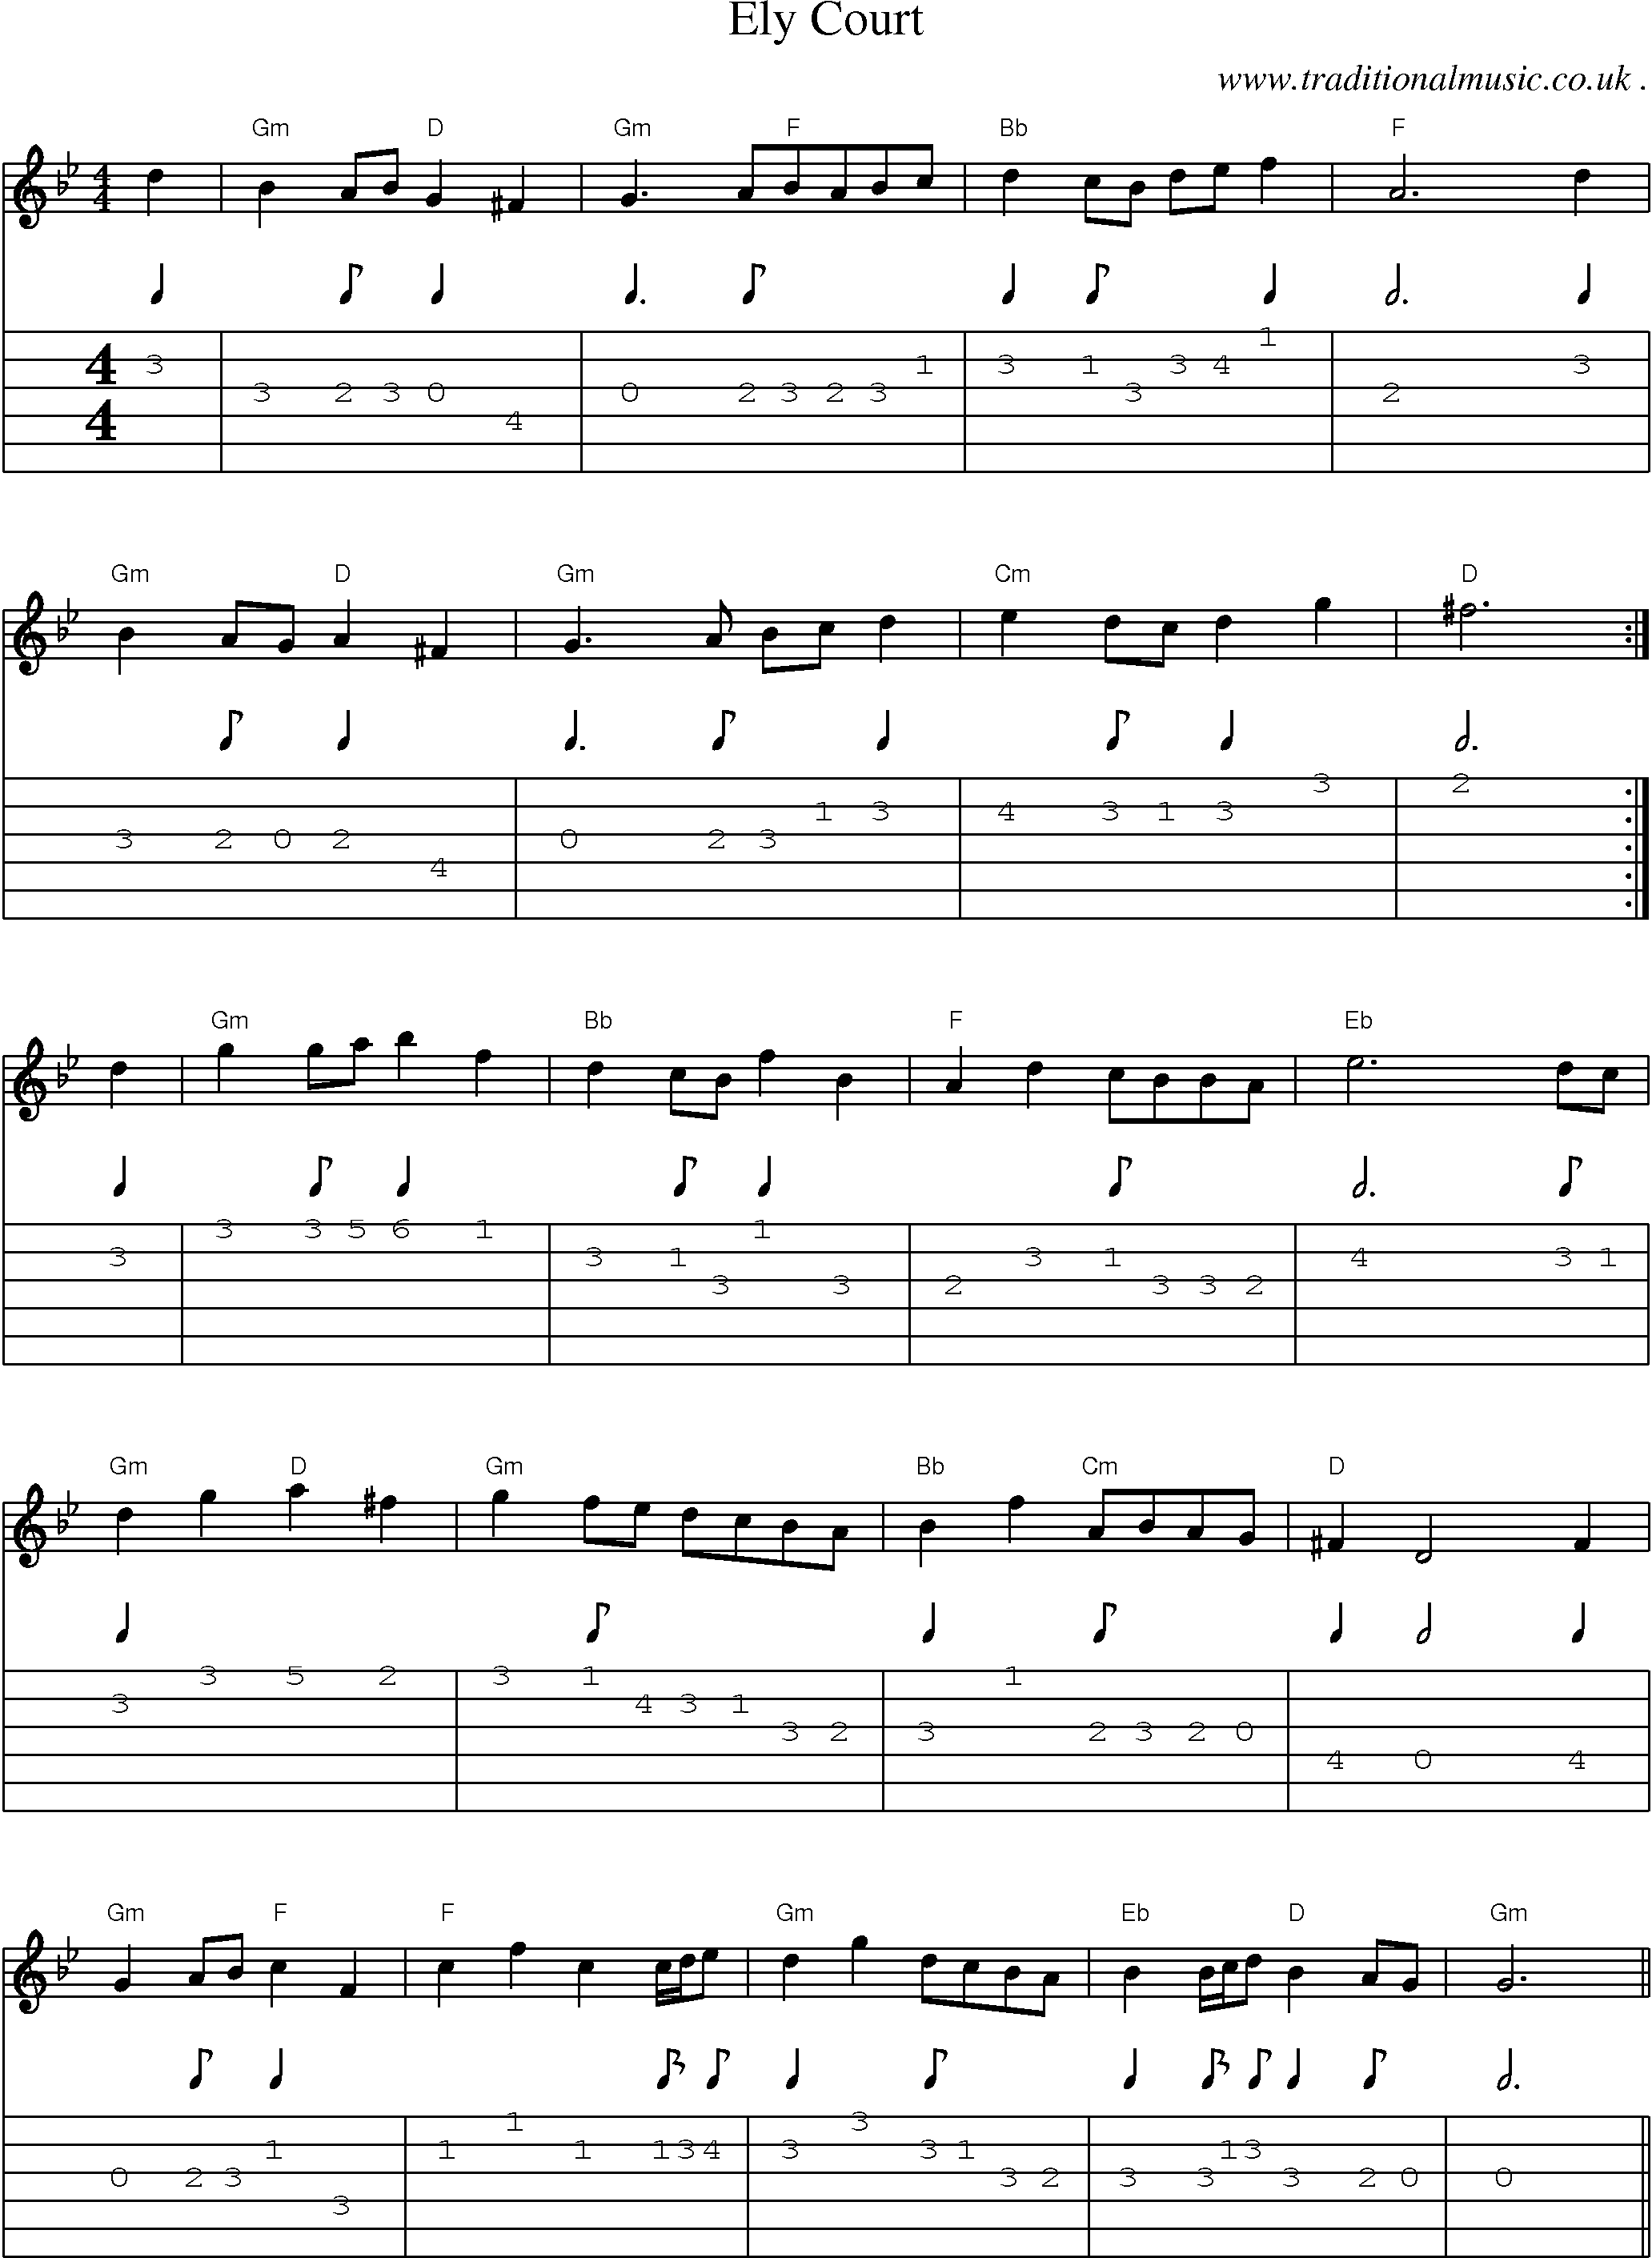 Sheet-Music and Guitar Tabs for Ely Court